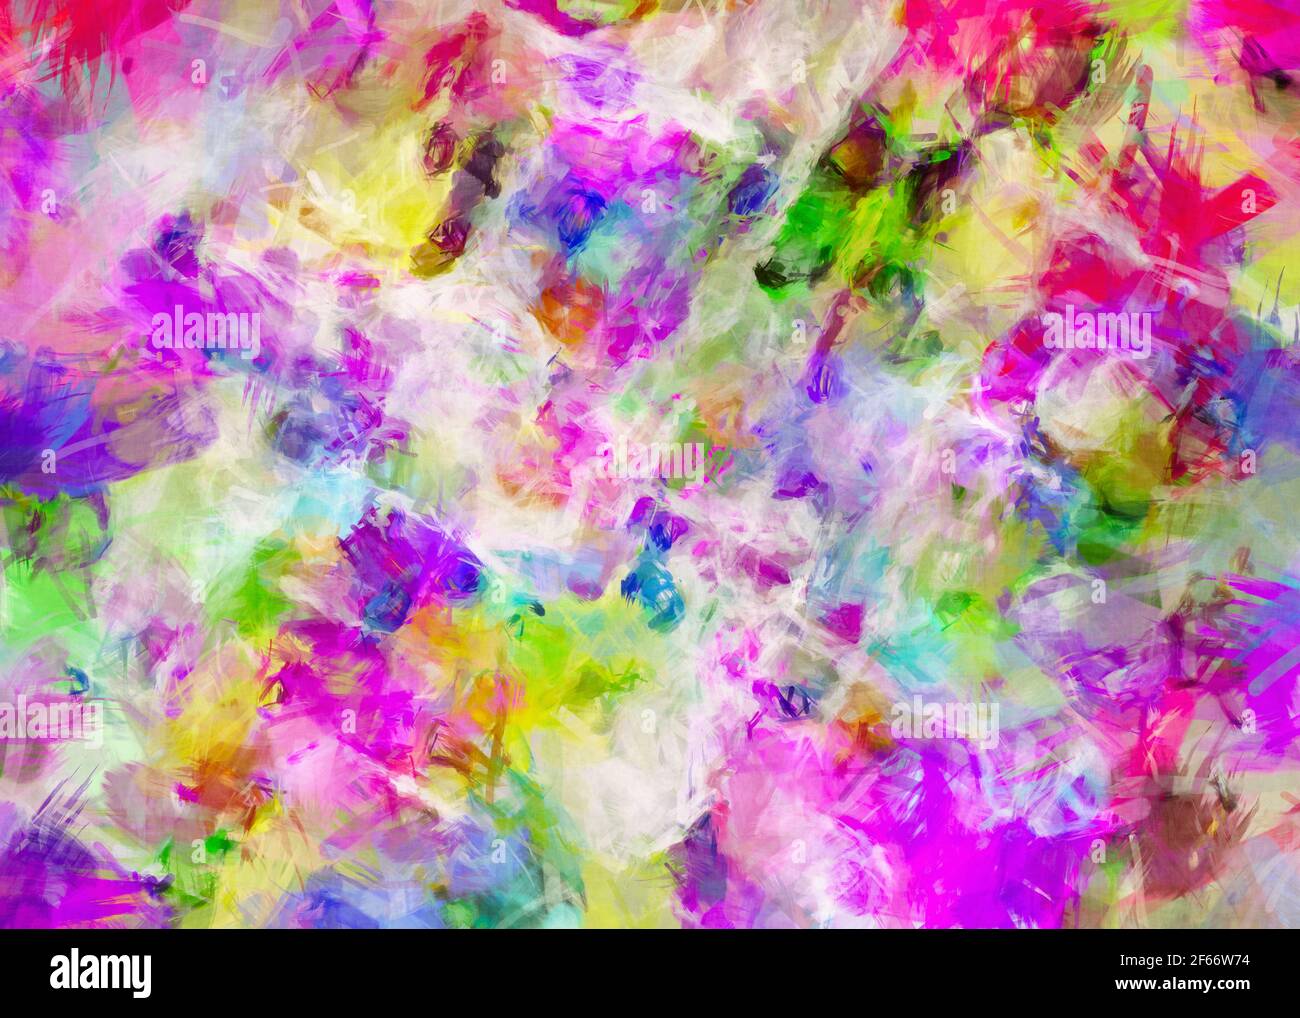 Abstract Pattern from Multicolored watercolor Backgrounds Stock Photo